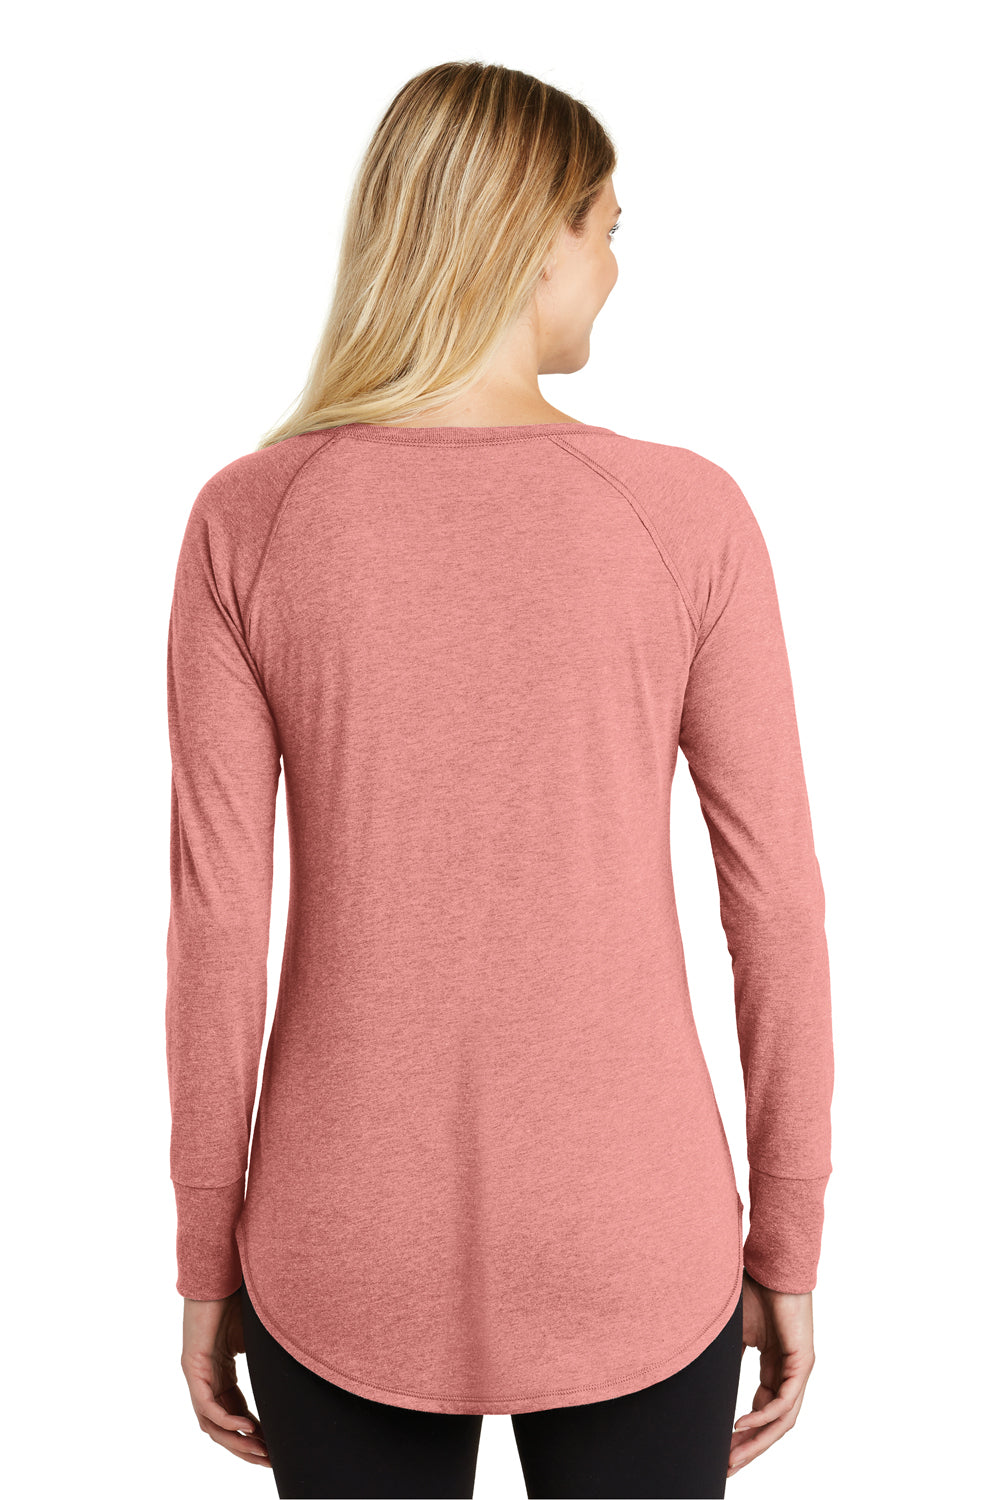 District DT132L Womens Perfect Tri Long Sleeve Crewneck T-Shirt Blush Pink Frost Back